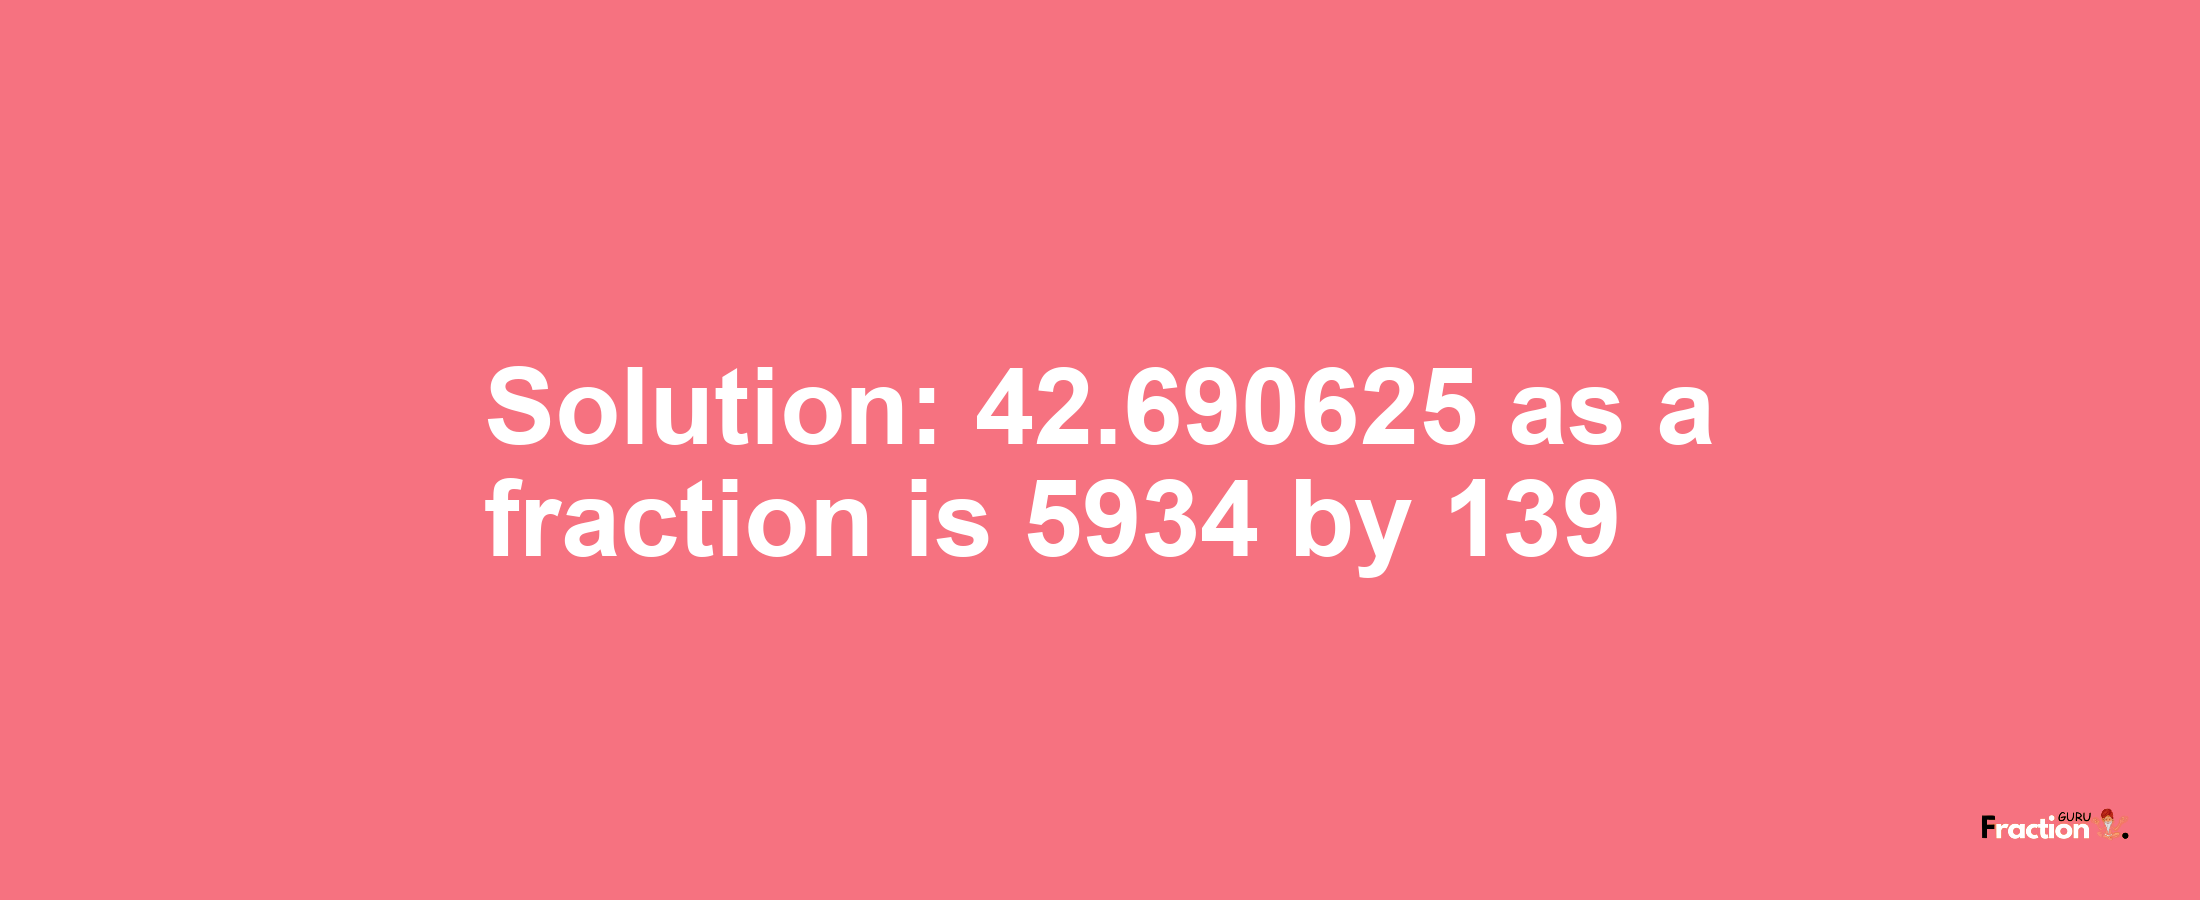 Solution:42.690625 as a fraction is 5934/139